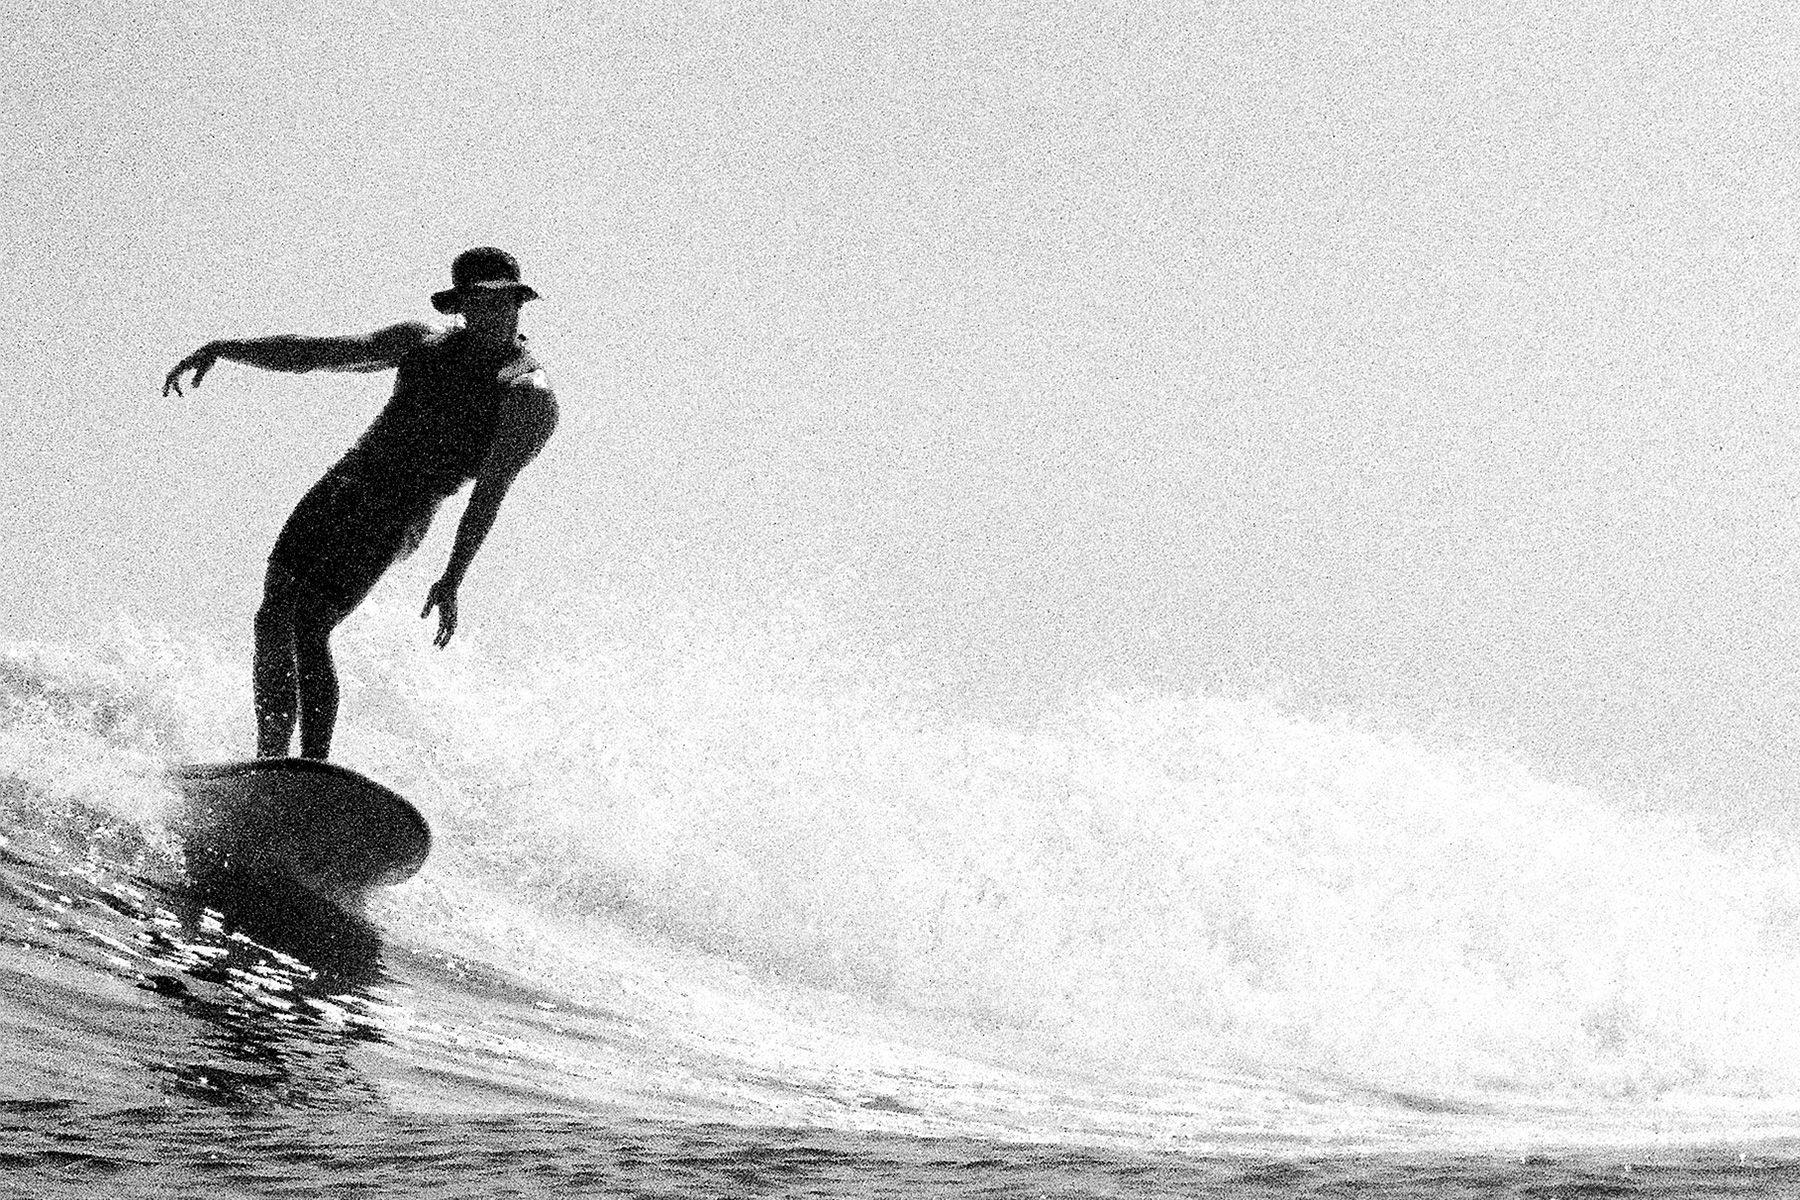 longboard surfer at malibu, captured on a nikonos by grant musso